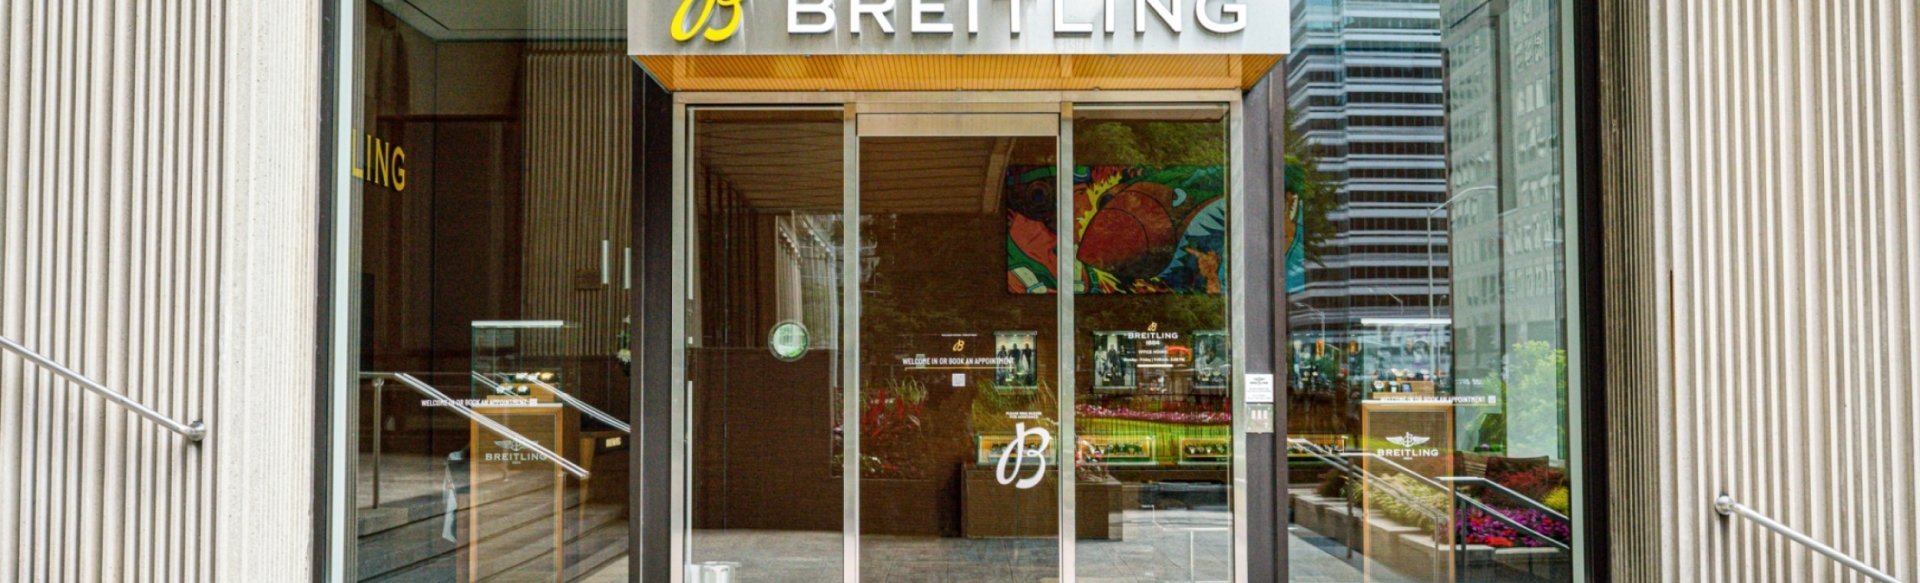 Official Breitling Boutique Toronto Bloor Street